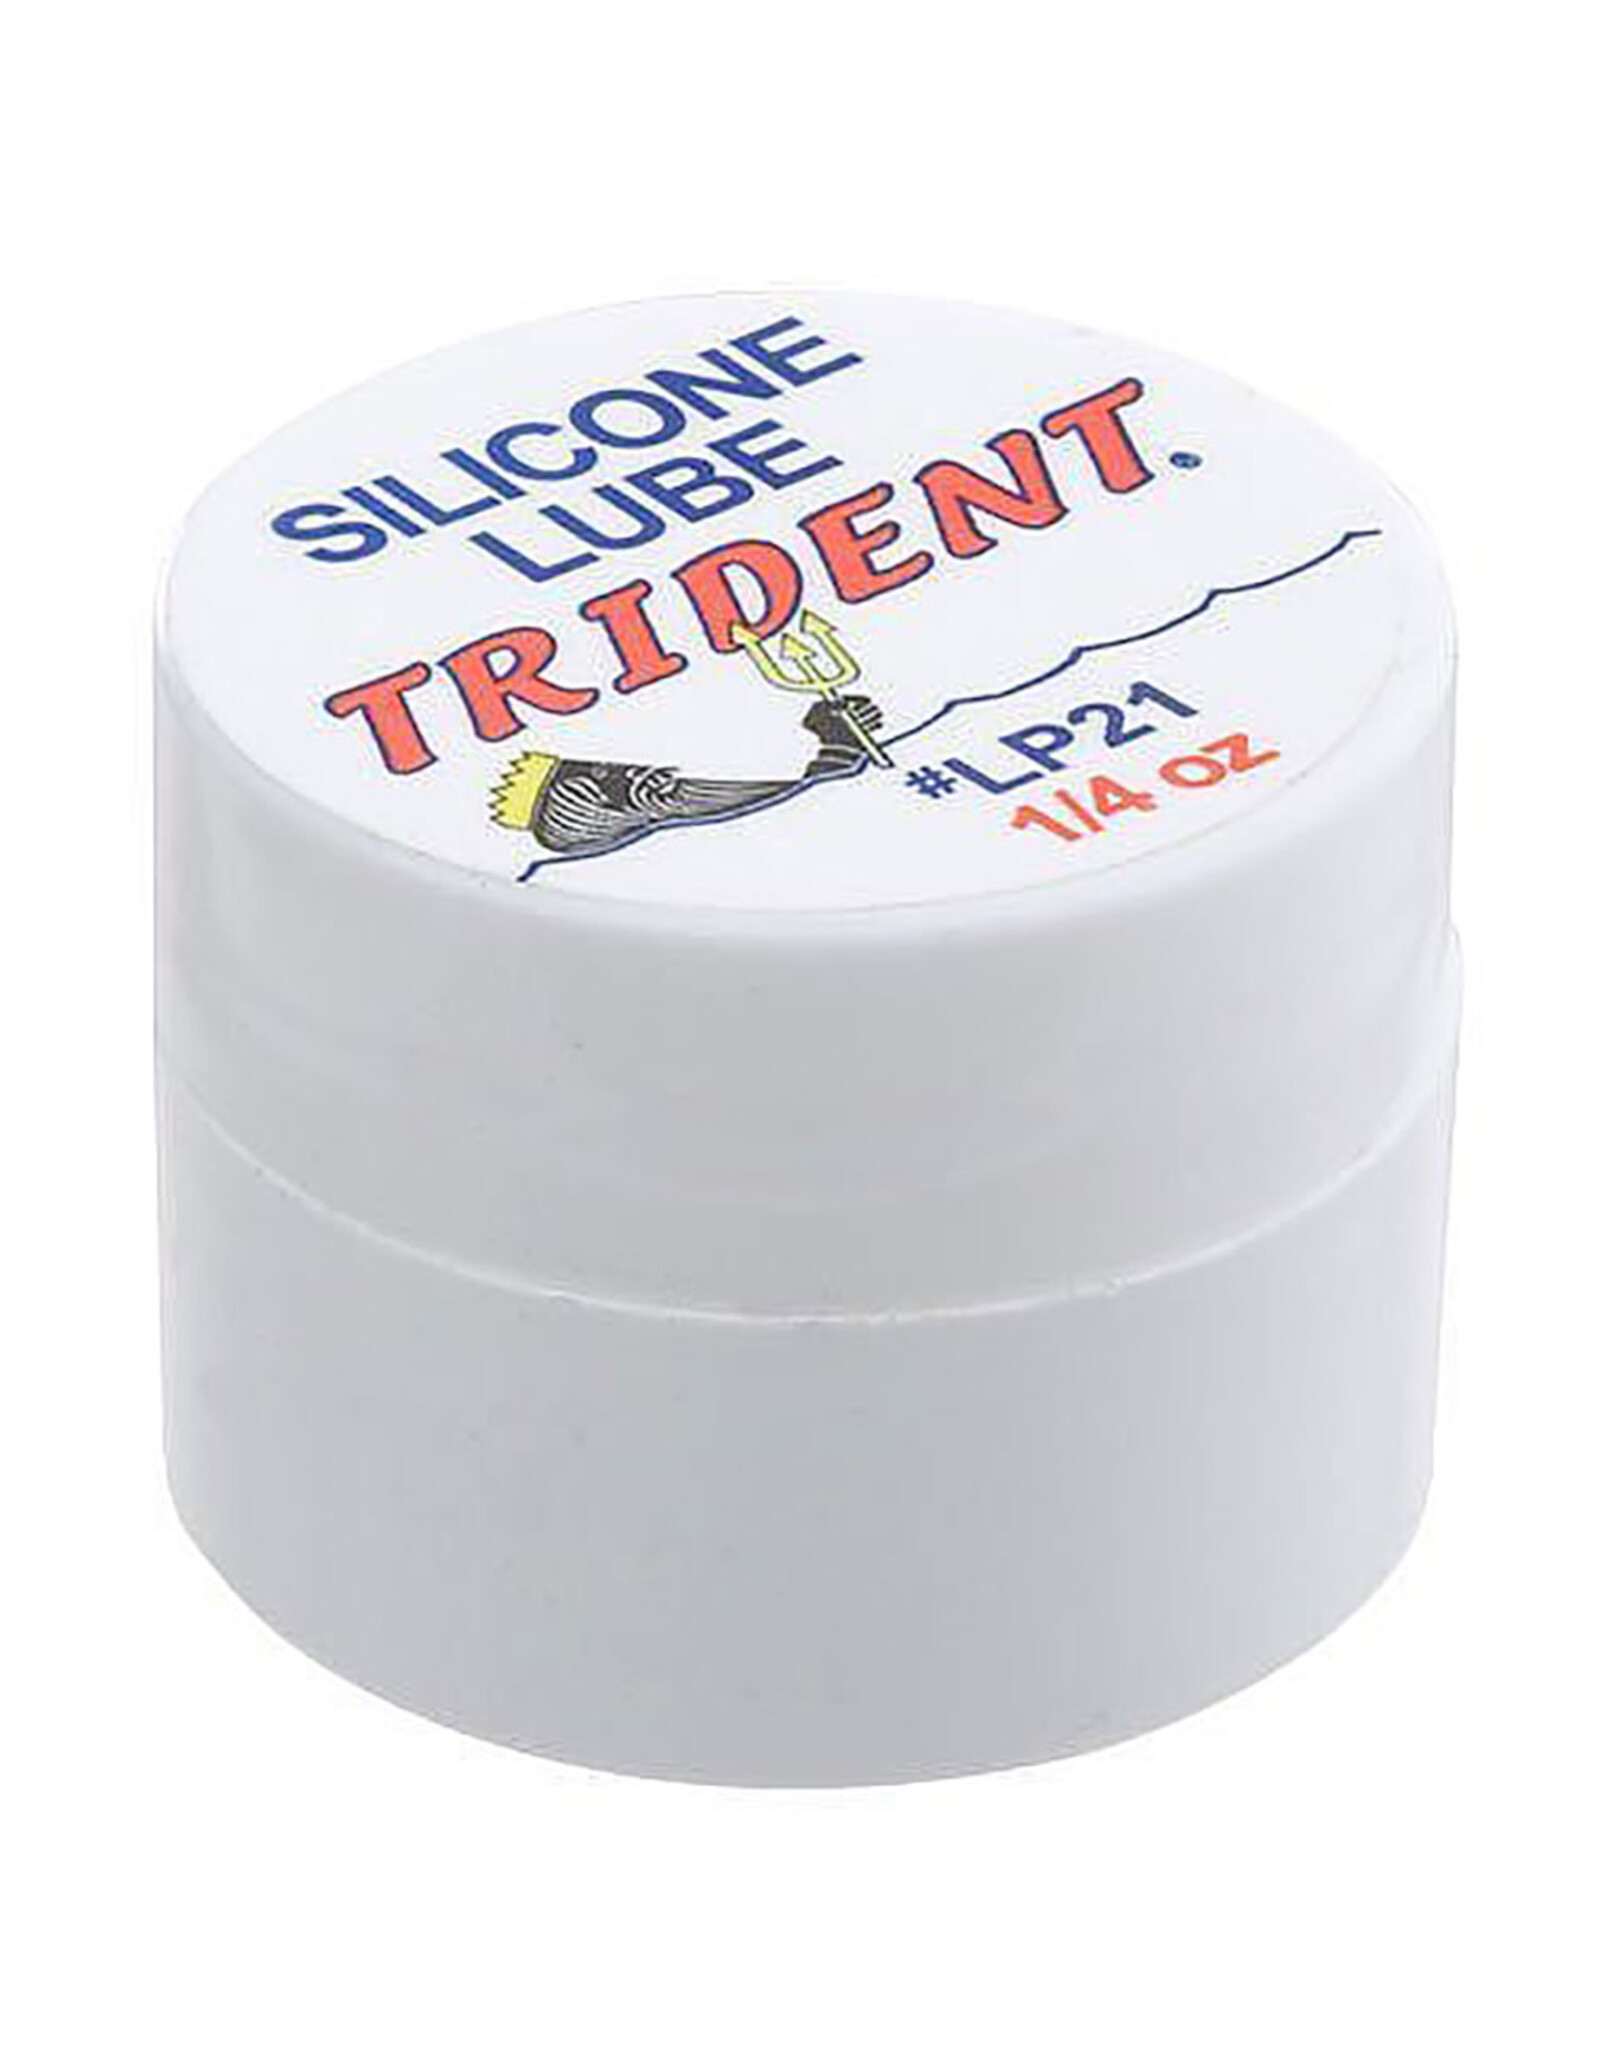 Trident Diving Equipment Trident Silicone Lube 1/4 oz